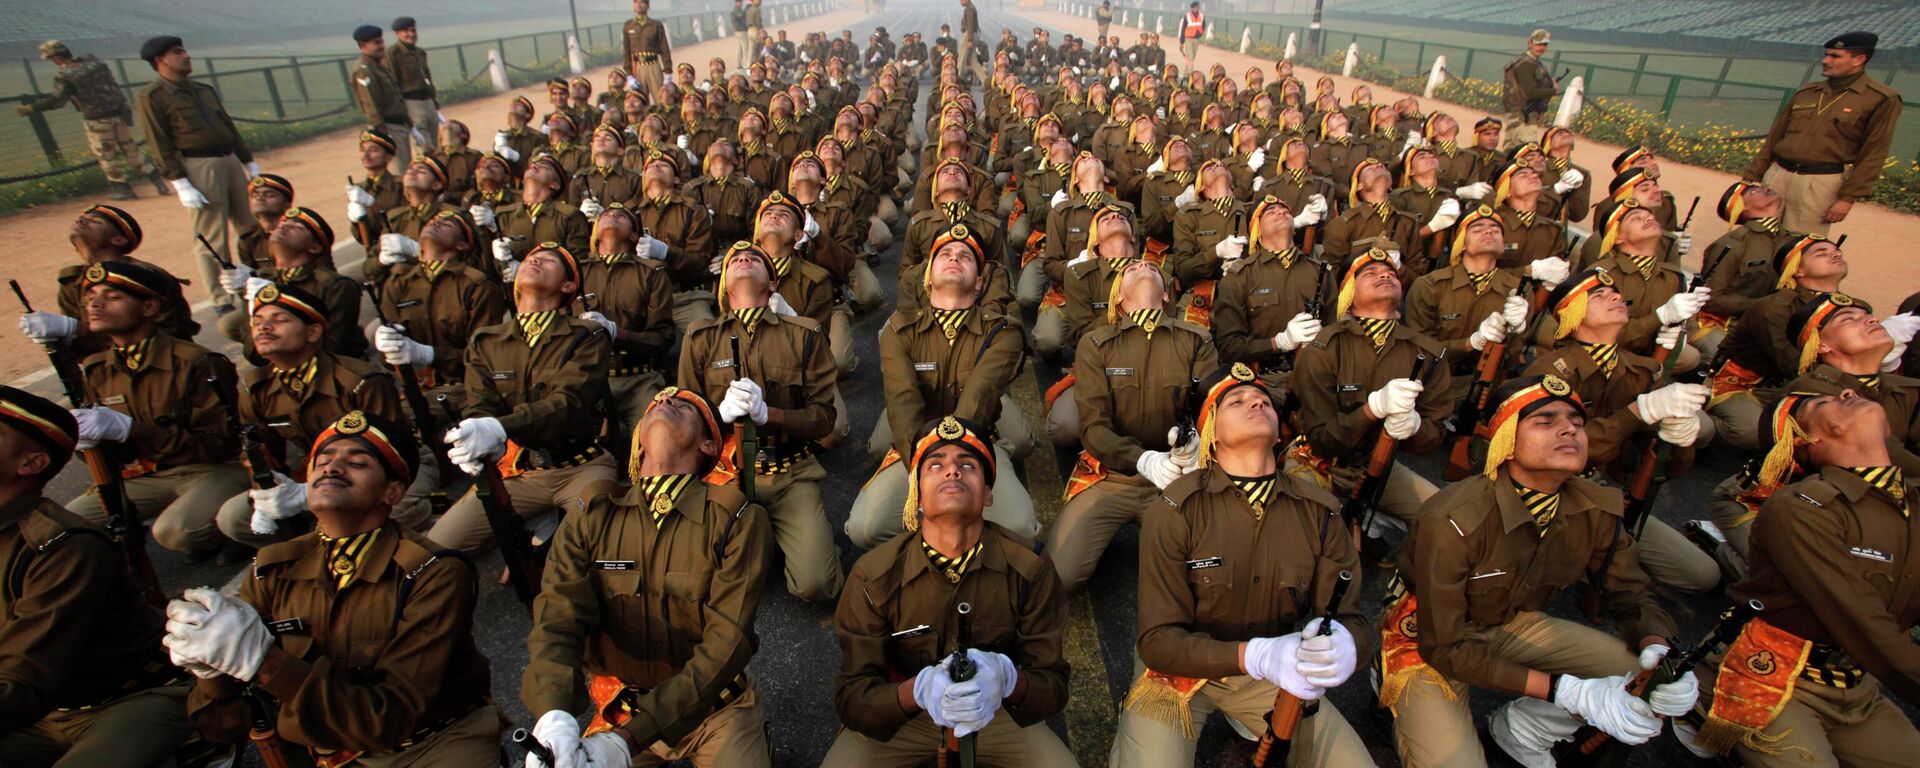 Indian paramilitary soldiers perform neck exercises after rehearsals for the upcoming Republic Day parade  amidst morning fog, in New Delhi, India, Wednesday, Dec. 28, 2011 - Sputnik International, 1920, 15.06.2022